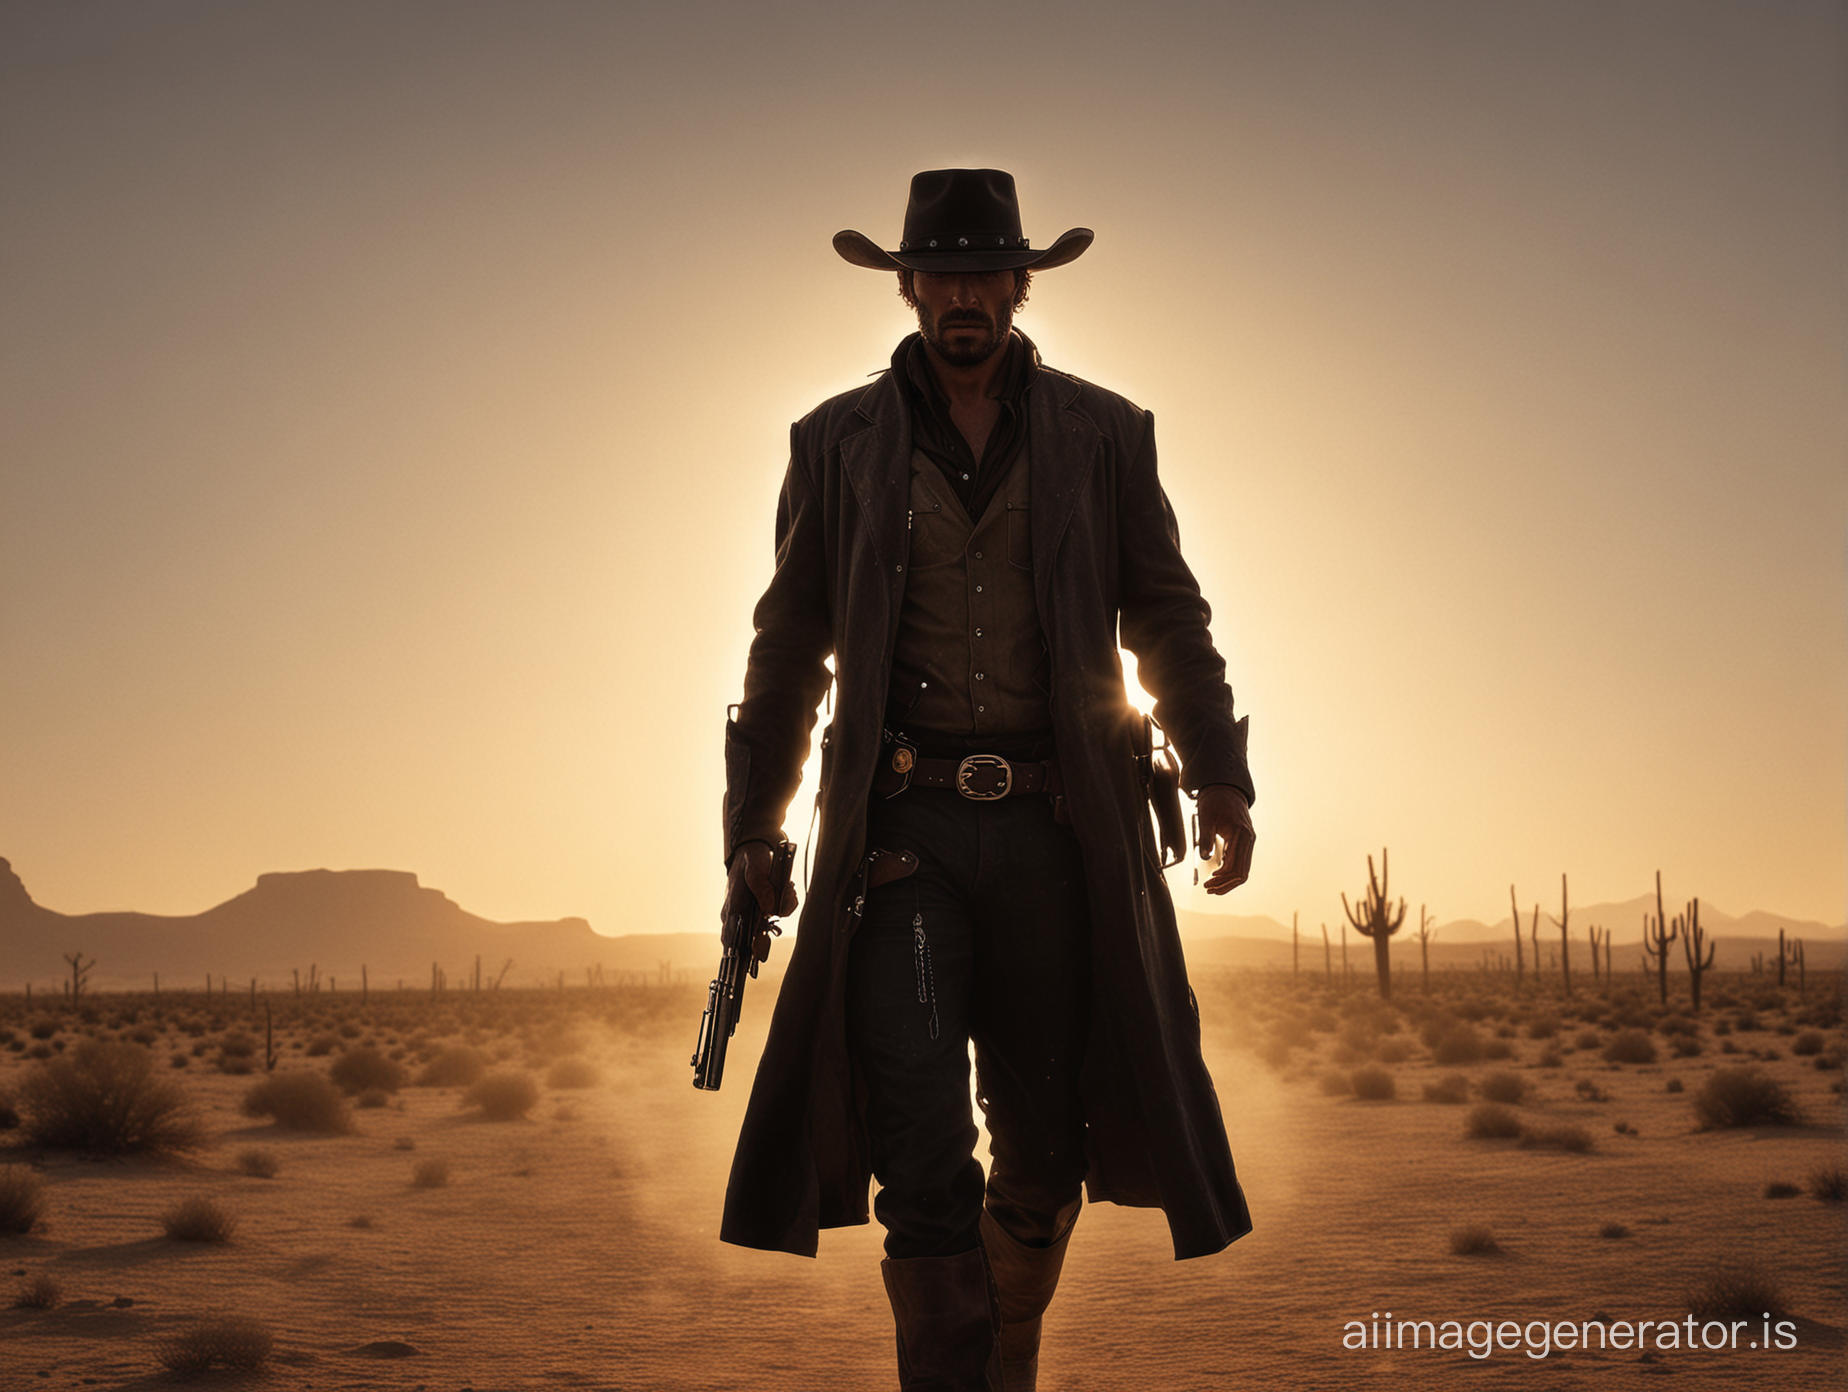 A lone dark outlaw walking into the sunset with his revolver at his side and a dust cowboy hat on his head